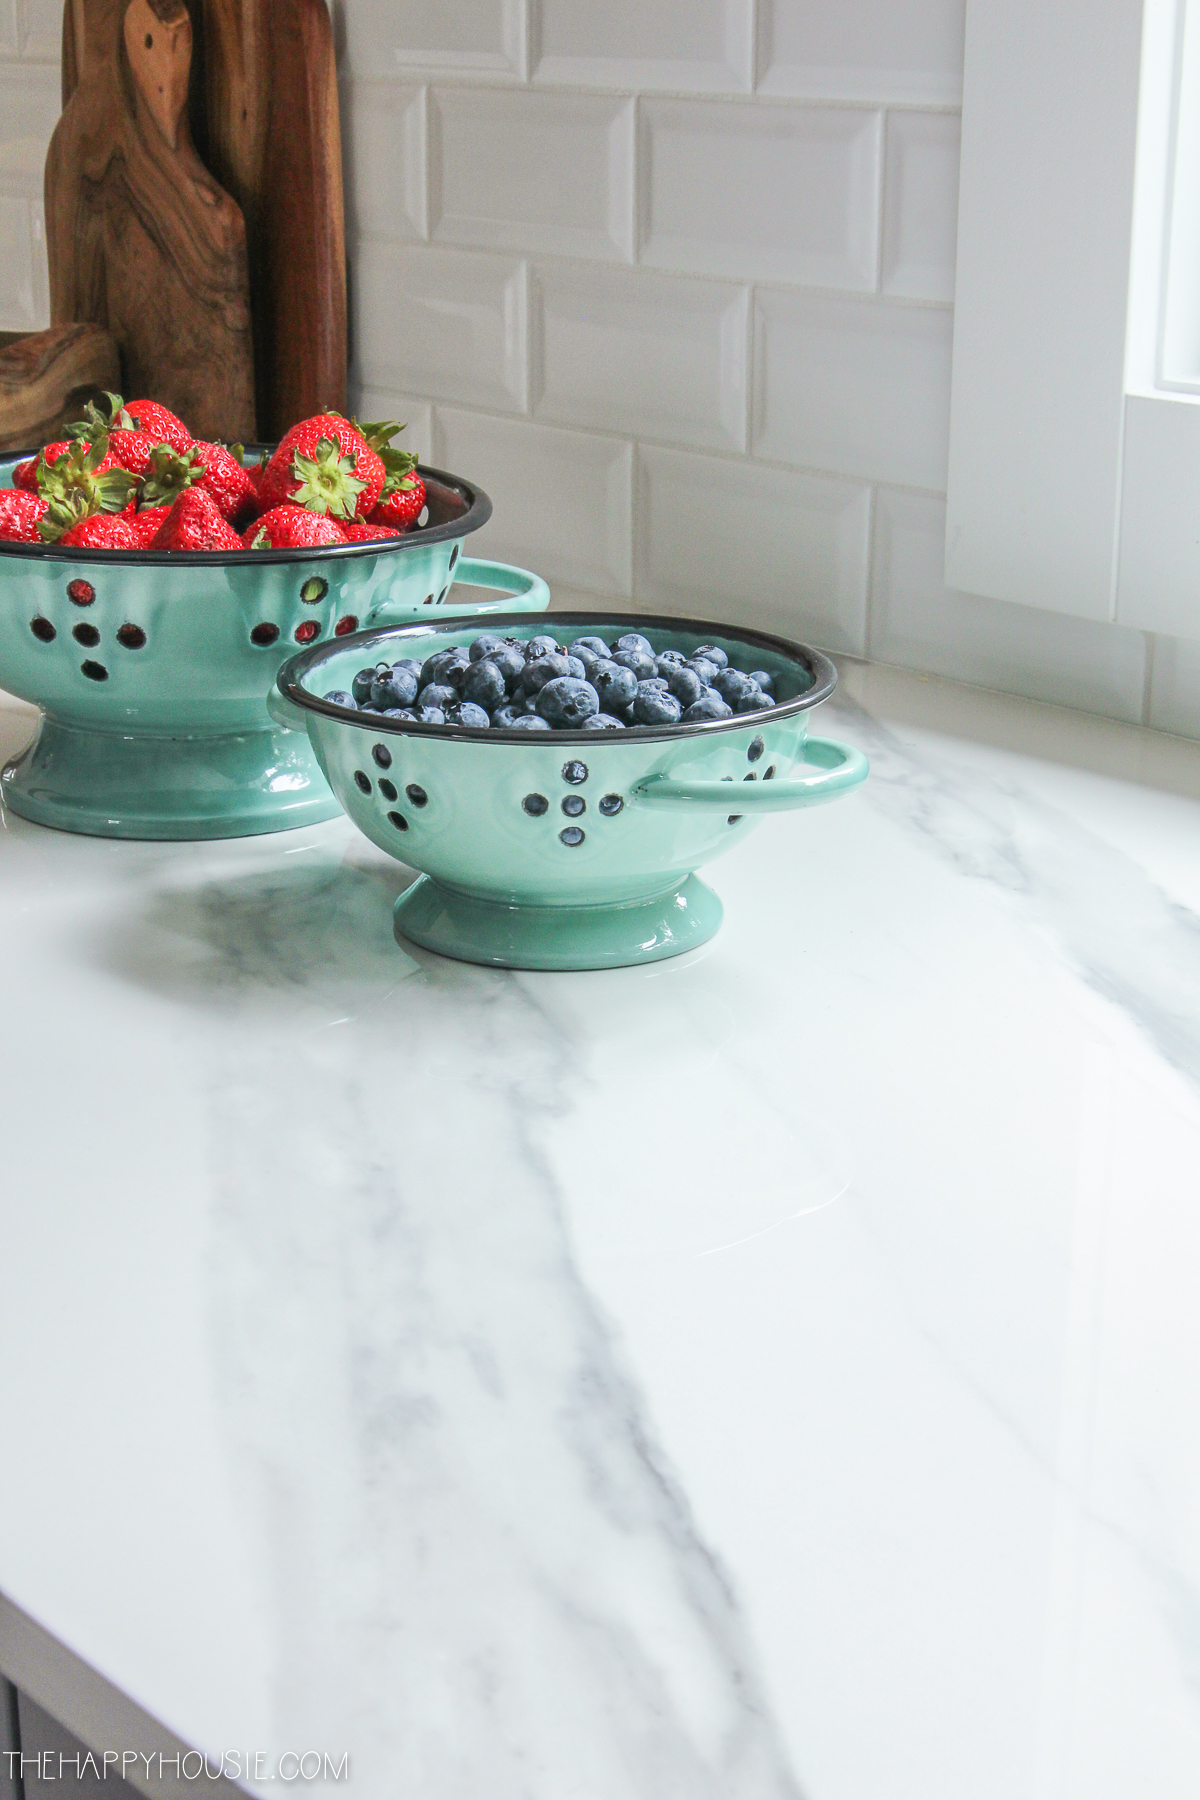 Turquoise bowls in the kitchen filled with fruit.